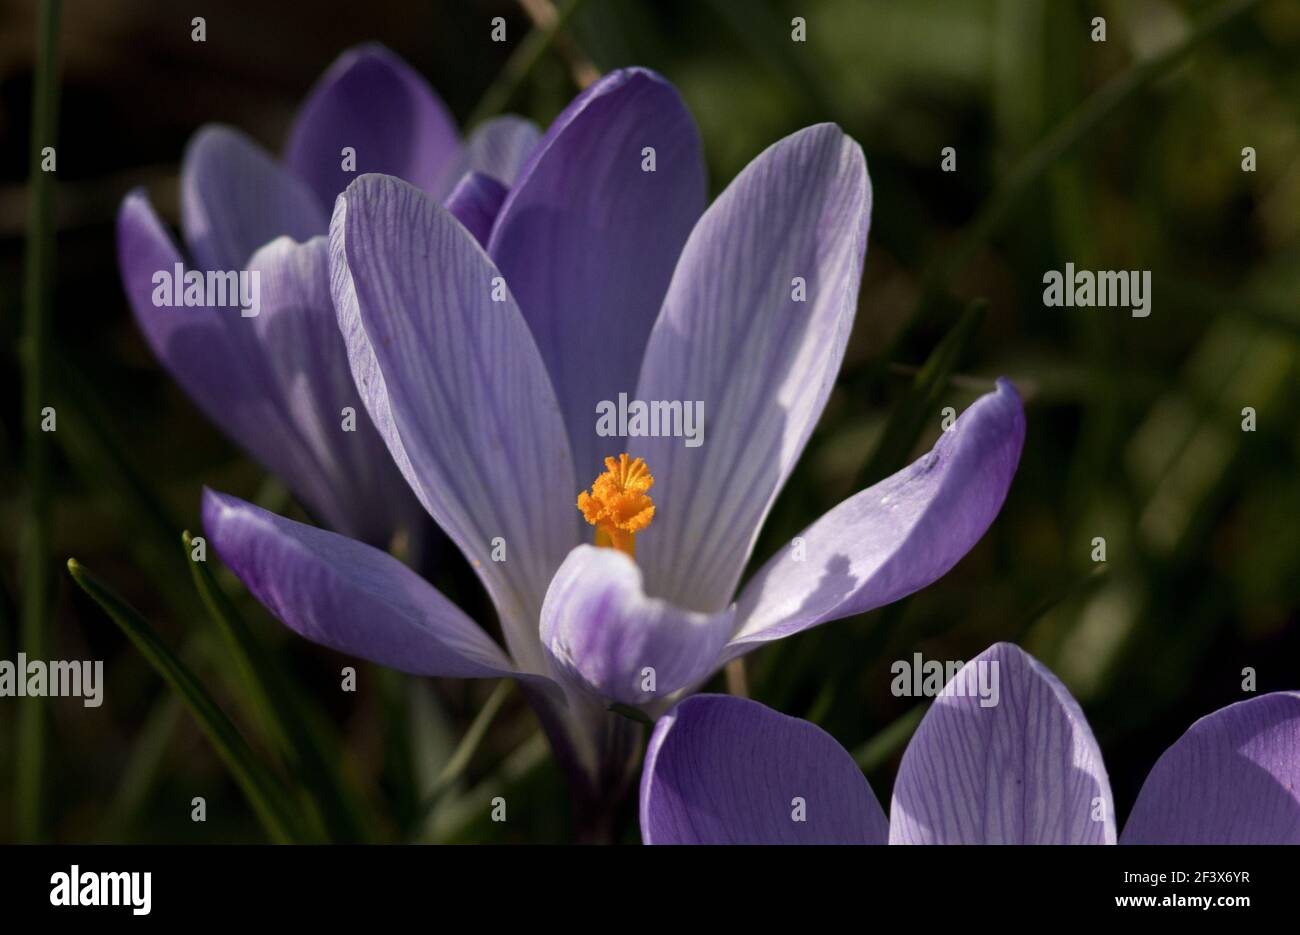 In early spring the floors of the woodlands and gardens show signs of the change of season with brilliant early flowering plants like this Crocus Stock Photo